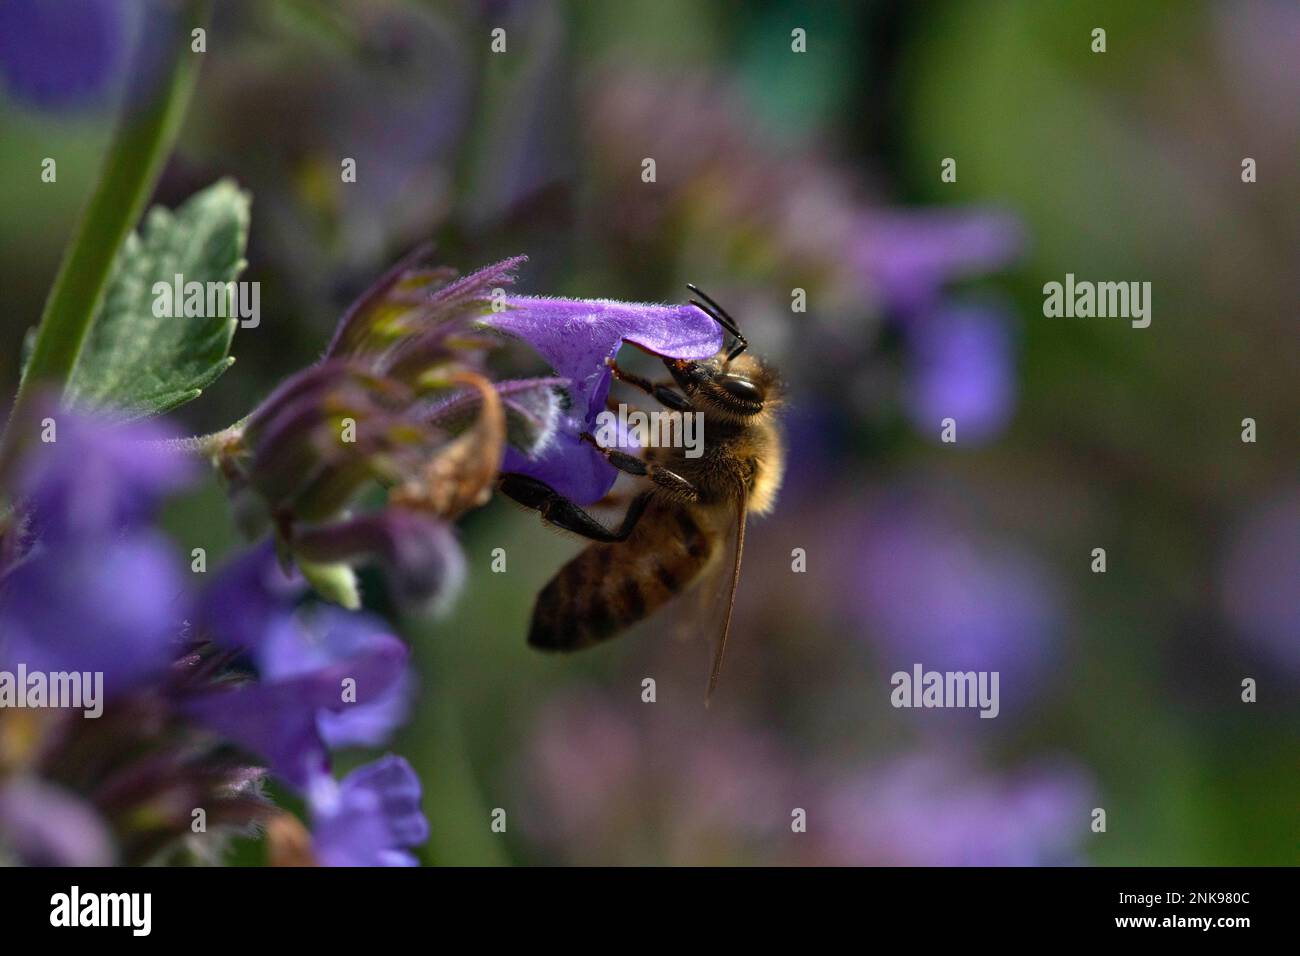 Bee pollinating a Catmint flower Stock Photo